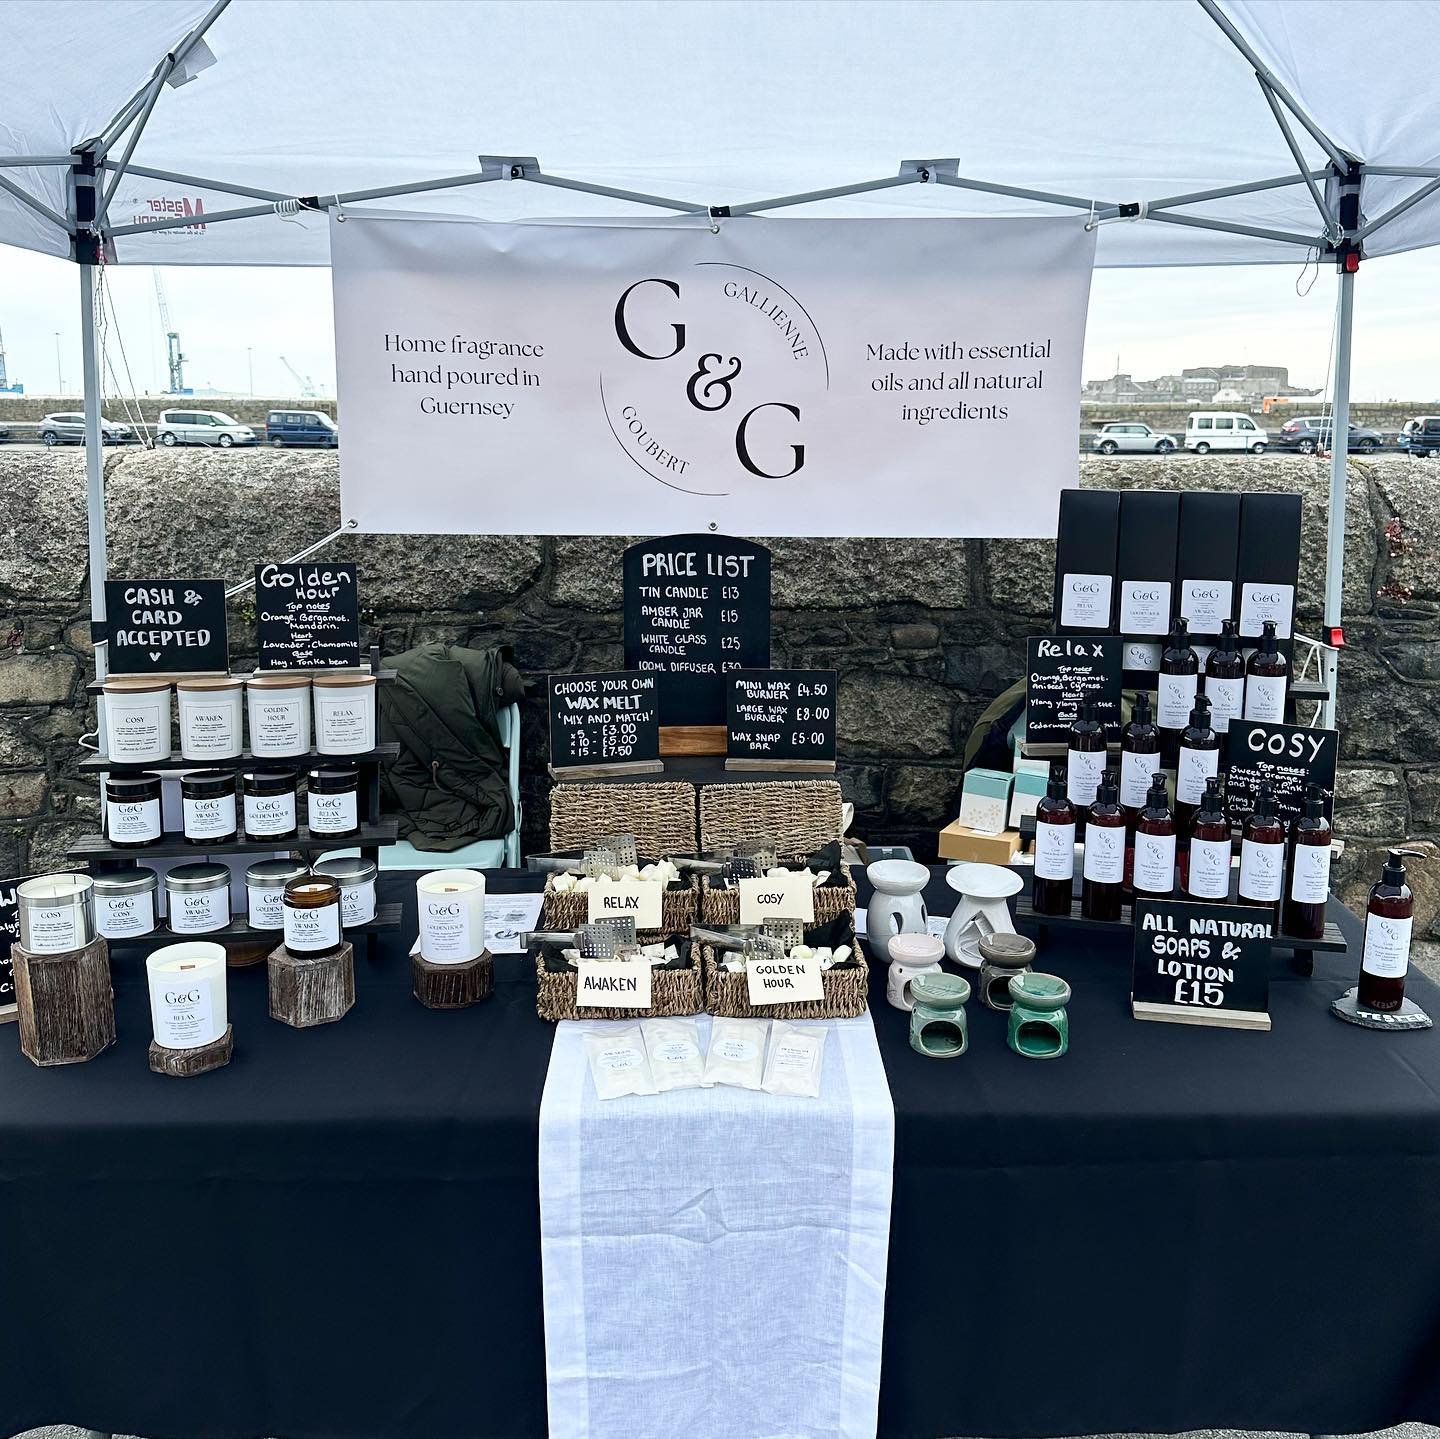 Find us at Seafront Sunday today 10am-4pm! We have our new wax melt mix and match option as well as our all natural soaps and lotion! 🤍 #guernsey #seafrontsunday